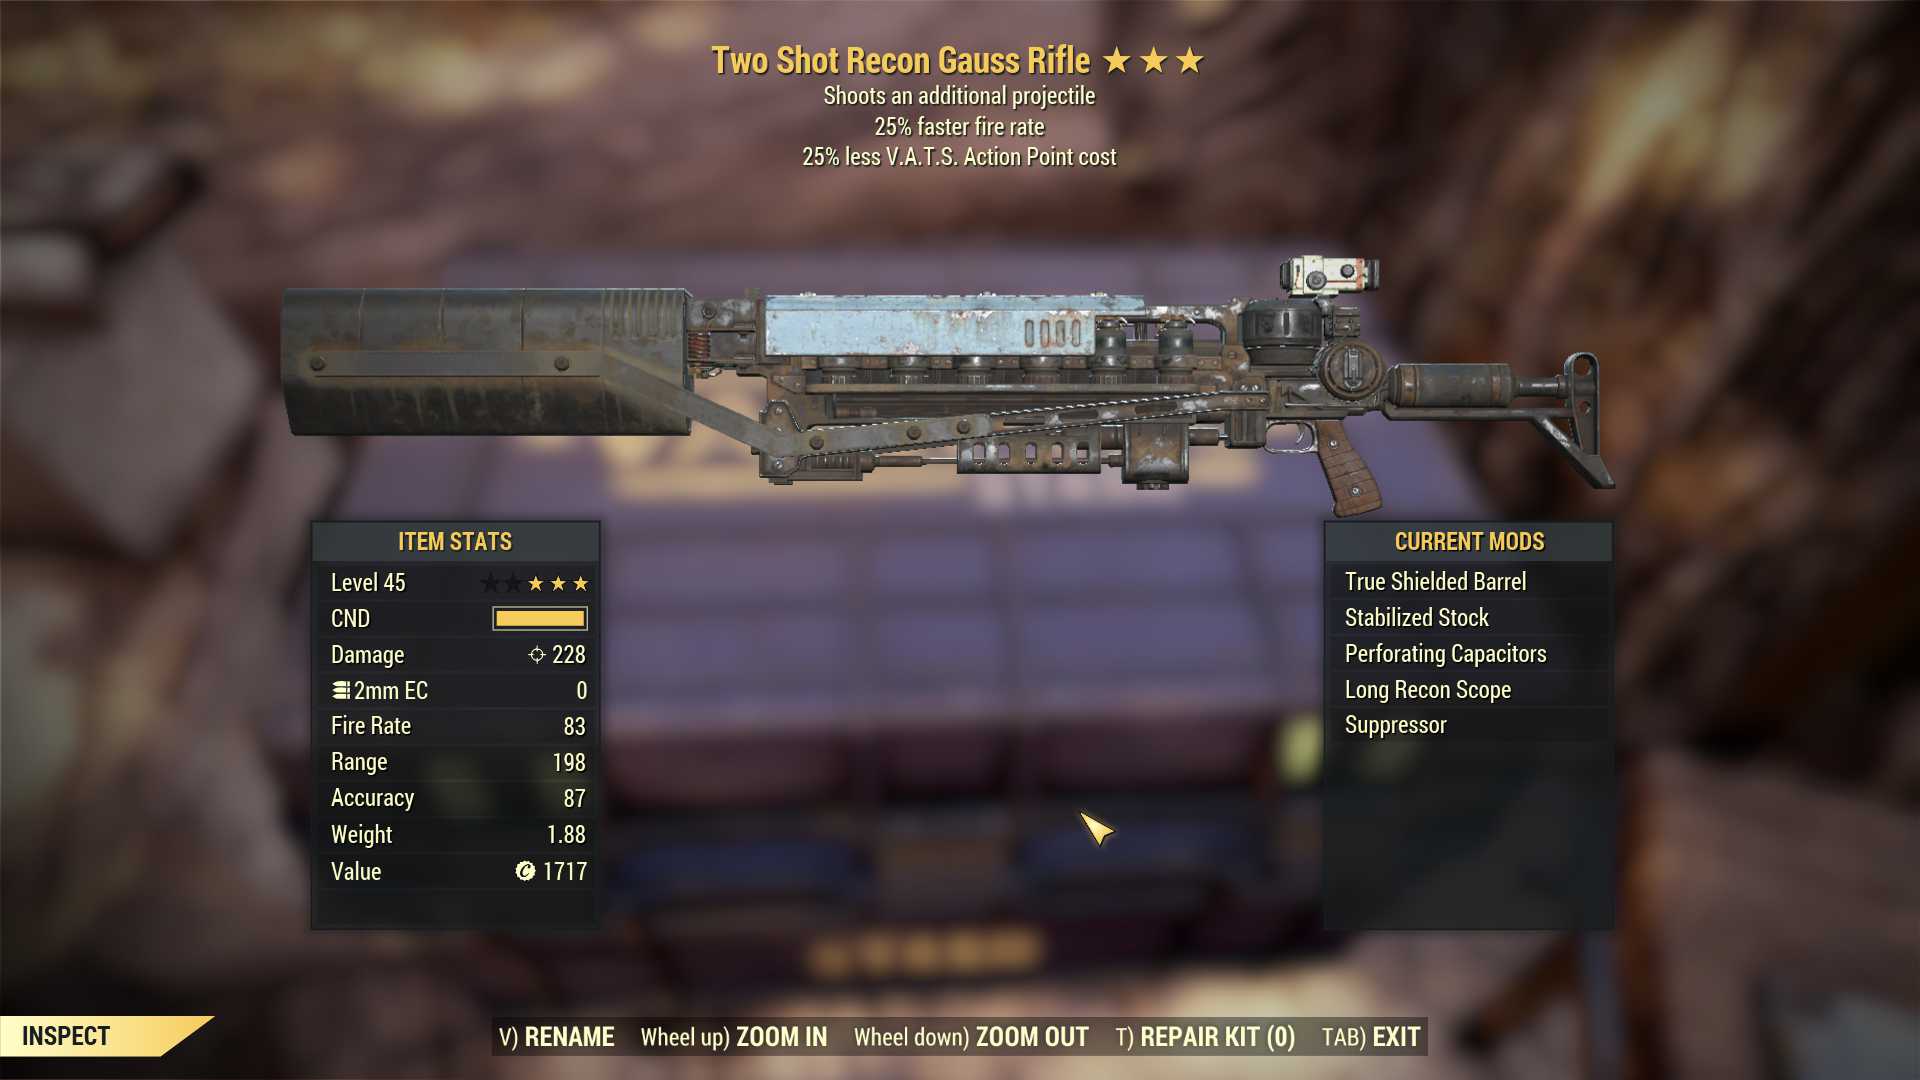 Two Shot Gauss Rifle (25% faster fire rate, 25% less VATS AP cost)